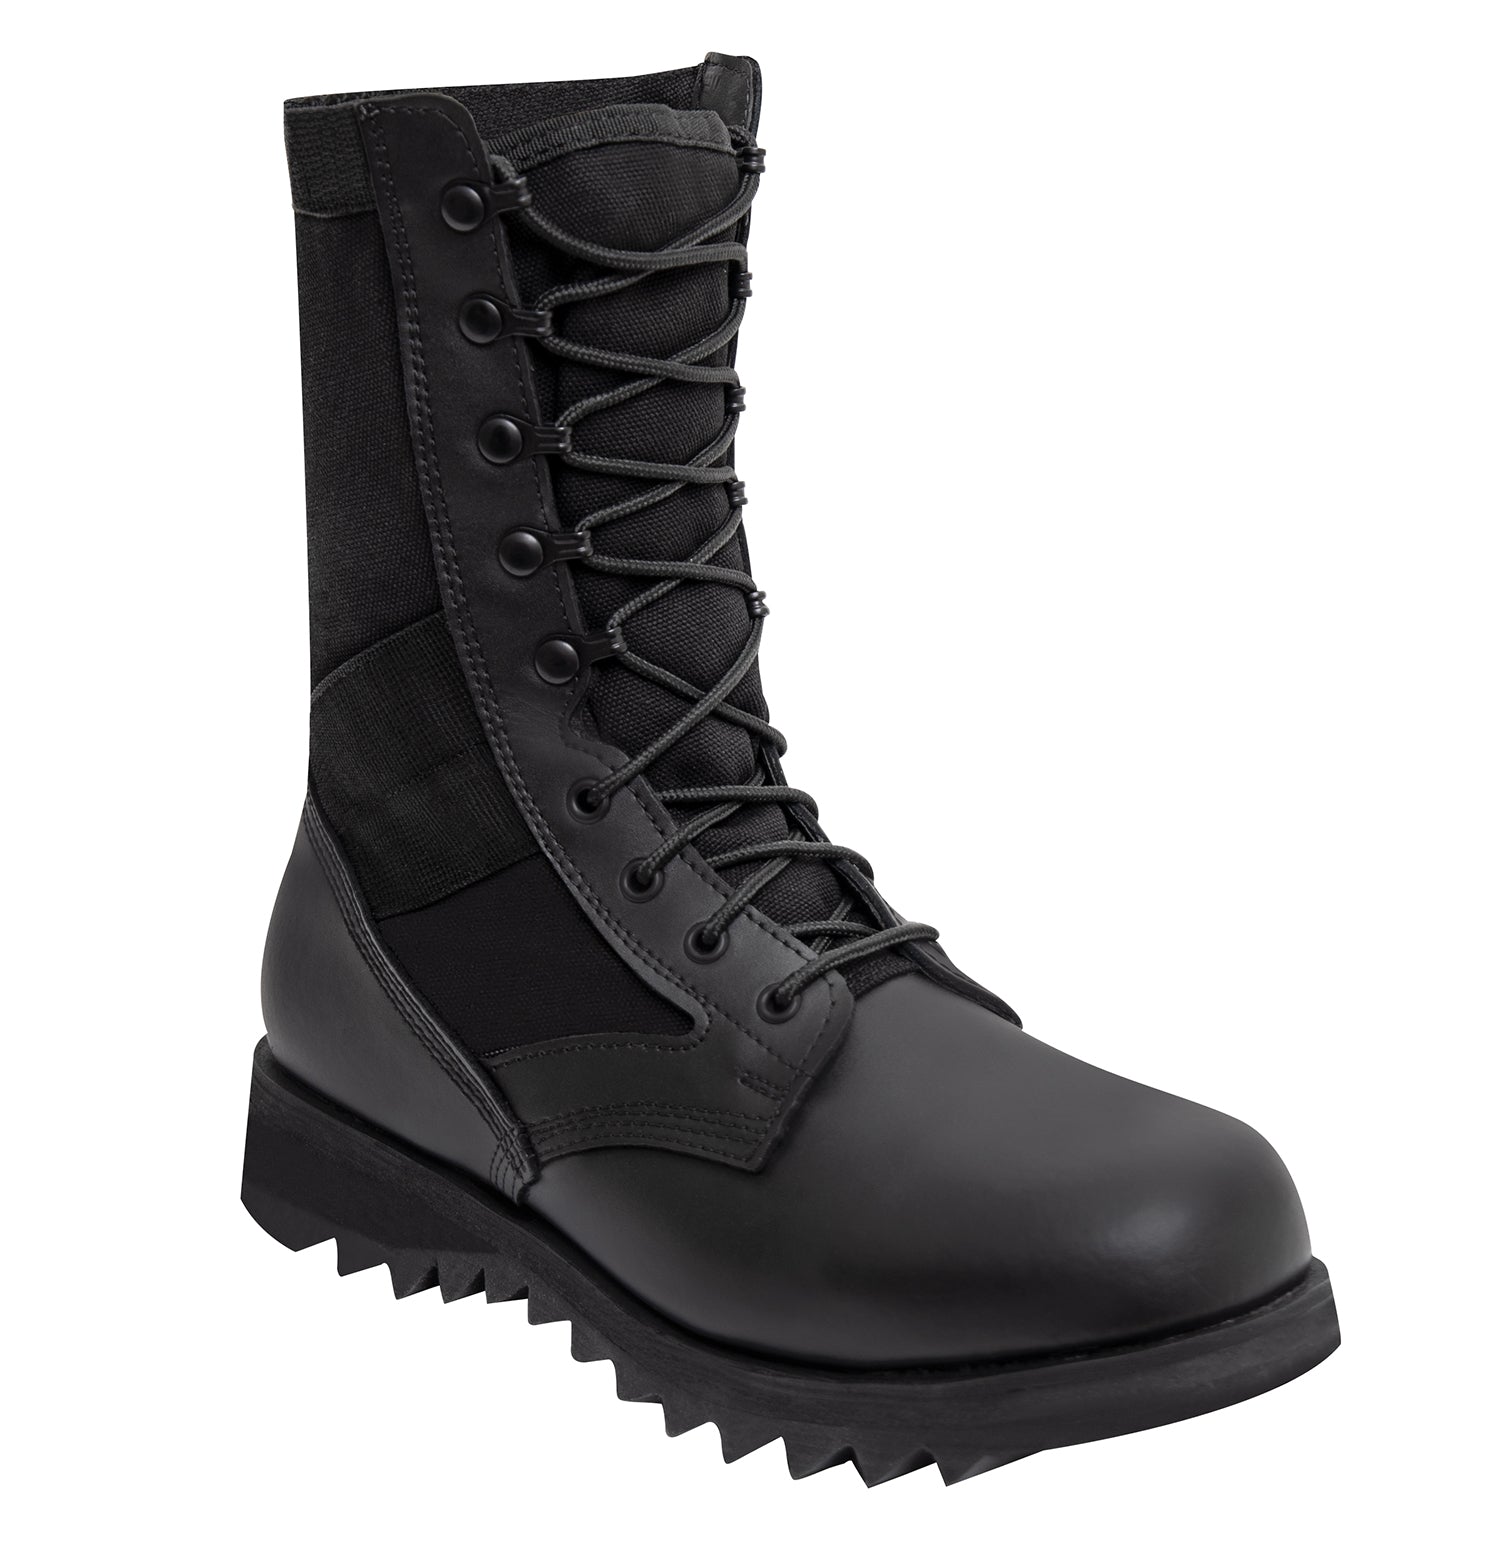 Milspec Black Ripple Sole Jungle Boots - 10 Inch Holiday Closeout Deals MilTac Tactical Military Outdoor Gear Australia